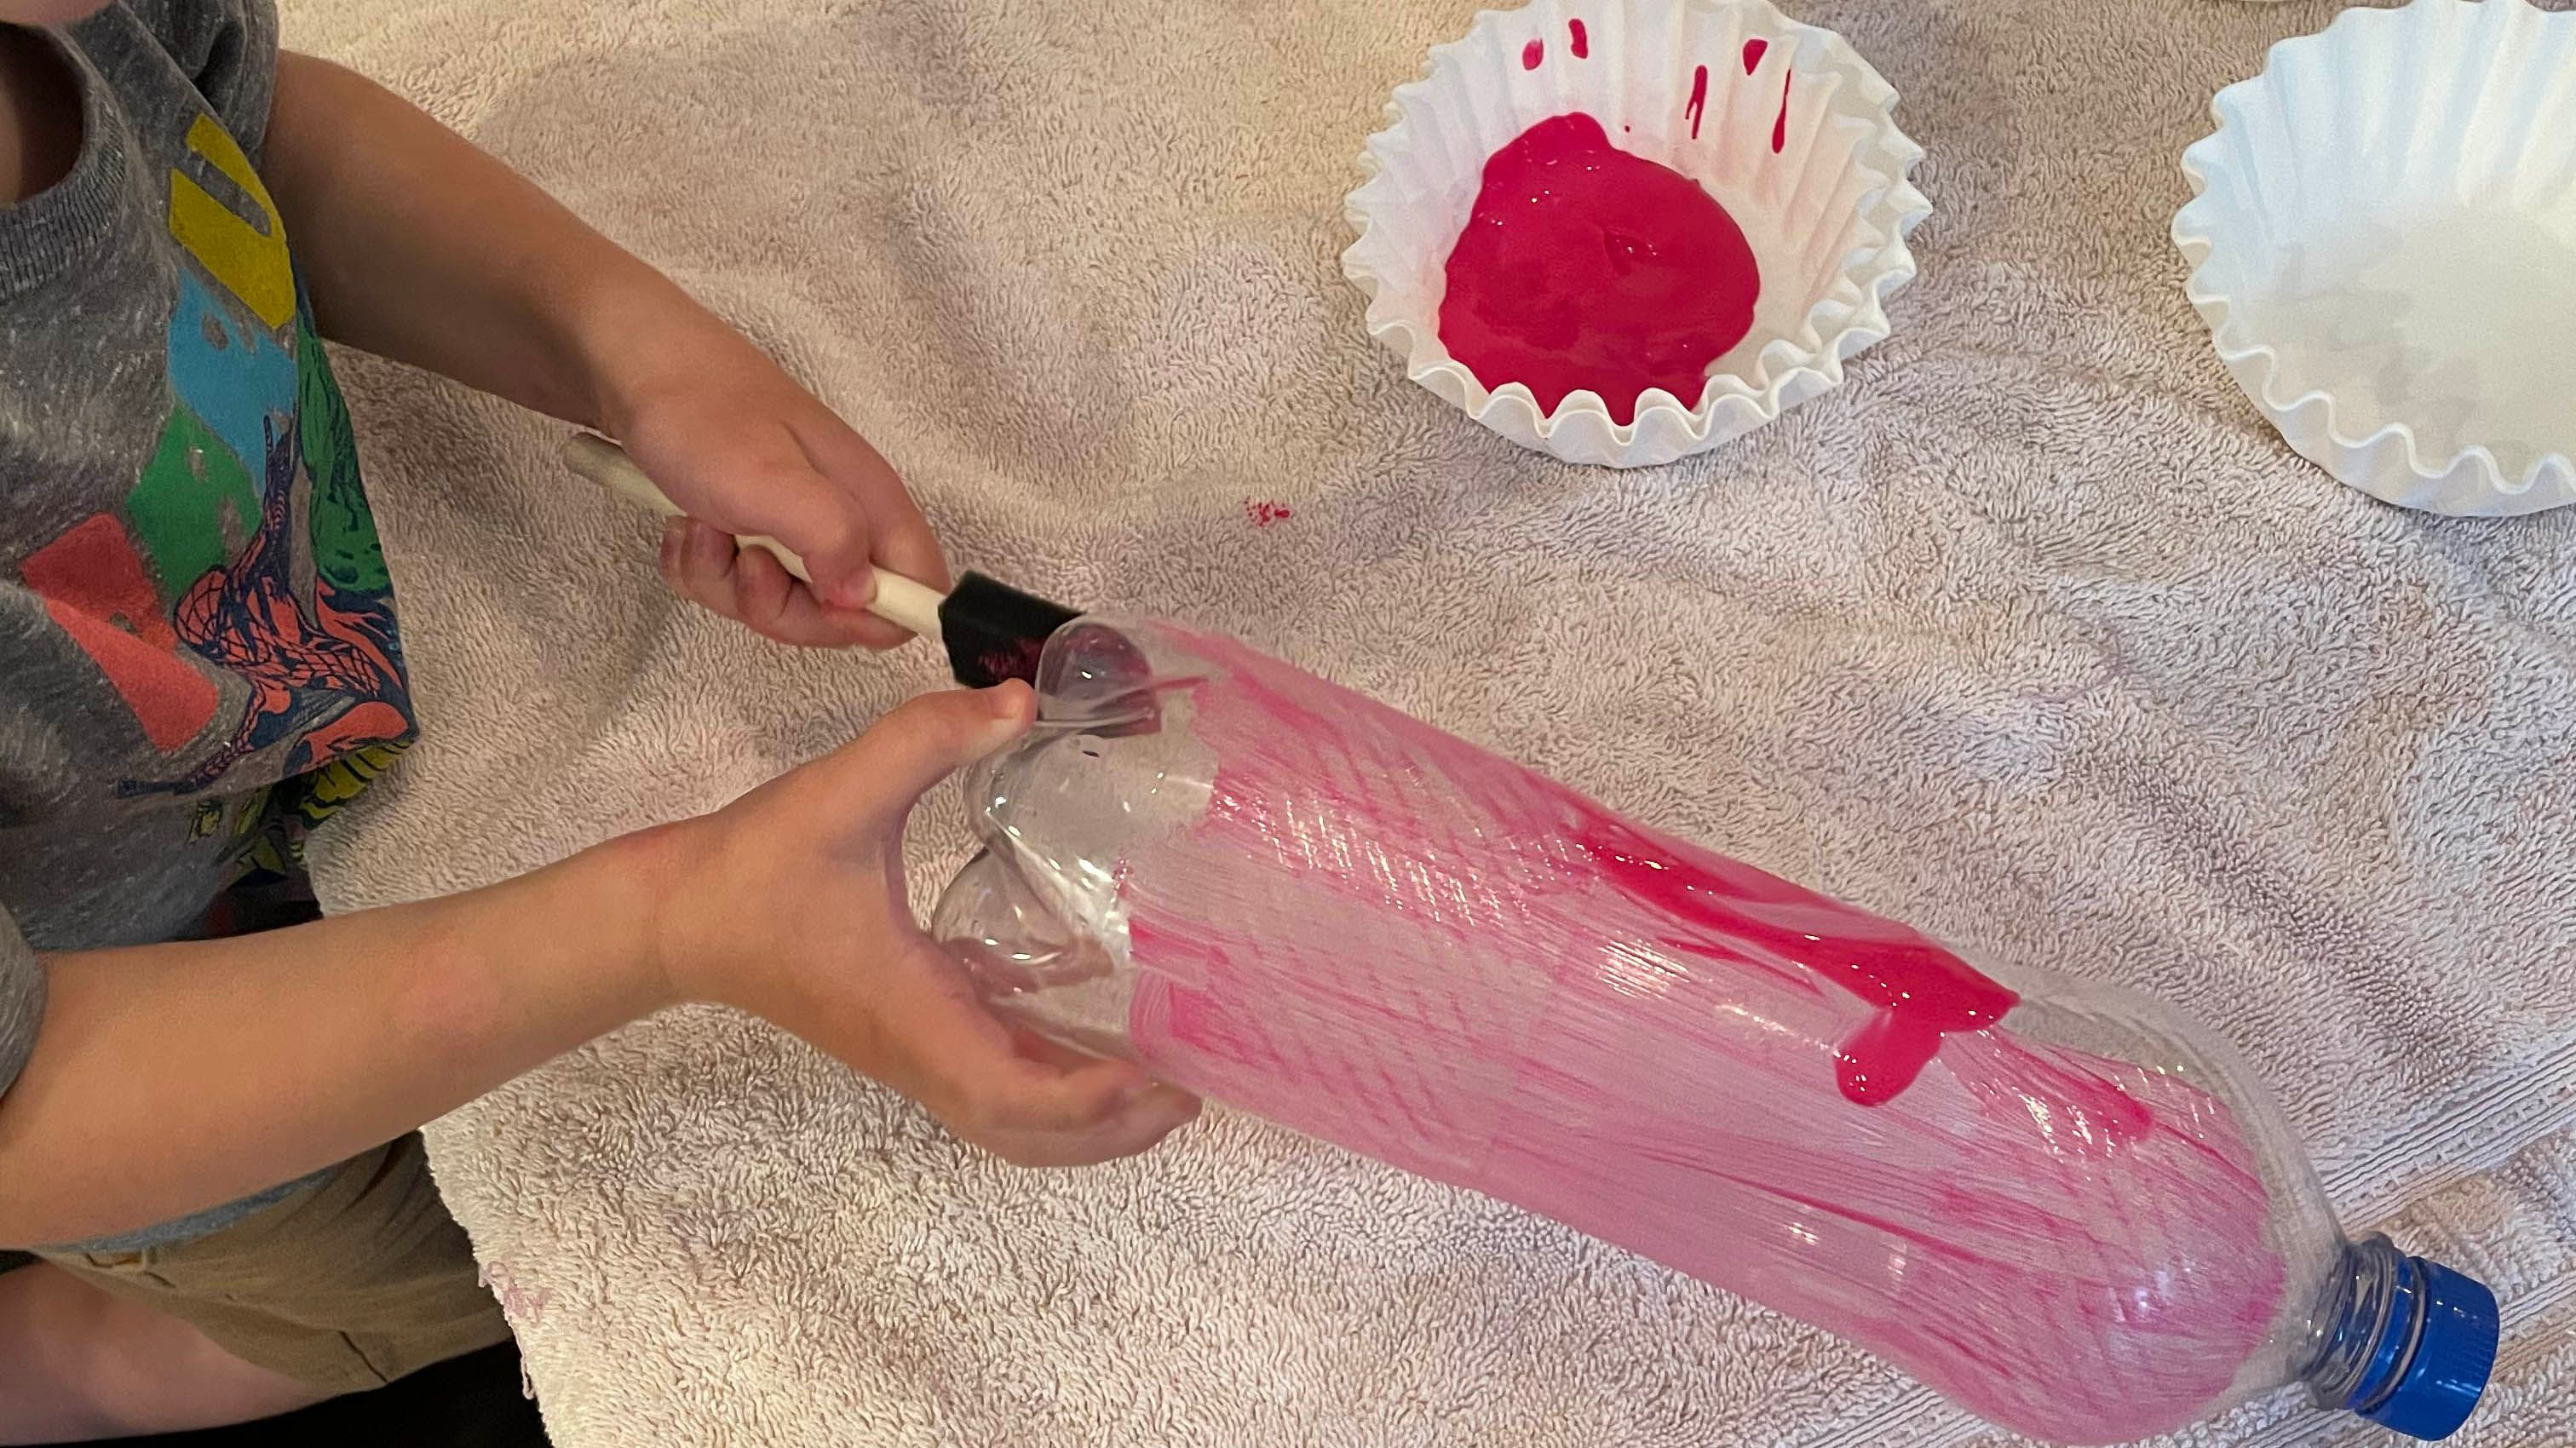 Child holding and painting plastic bottle pink with form brush